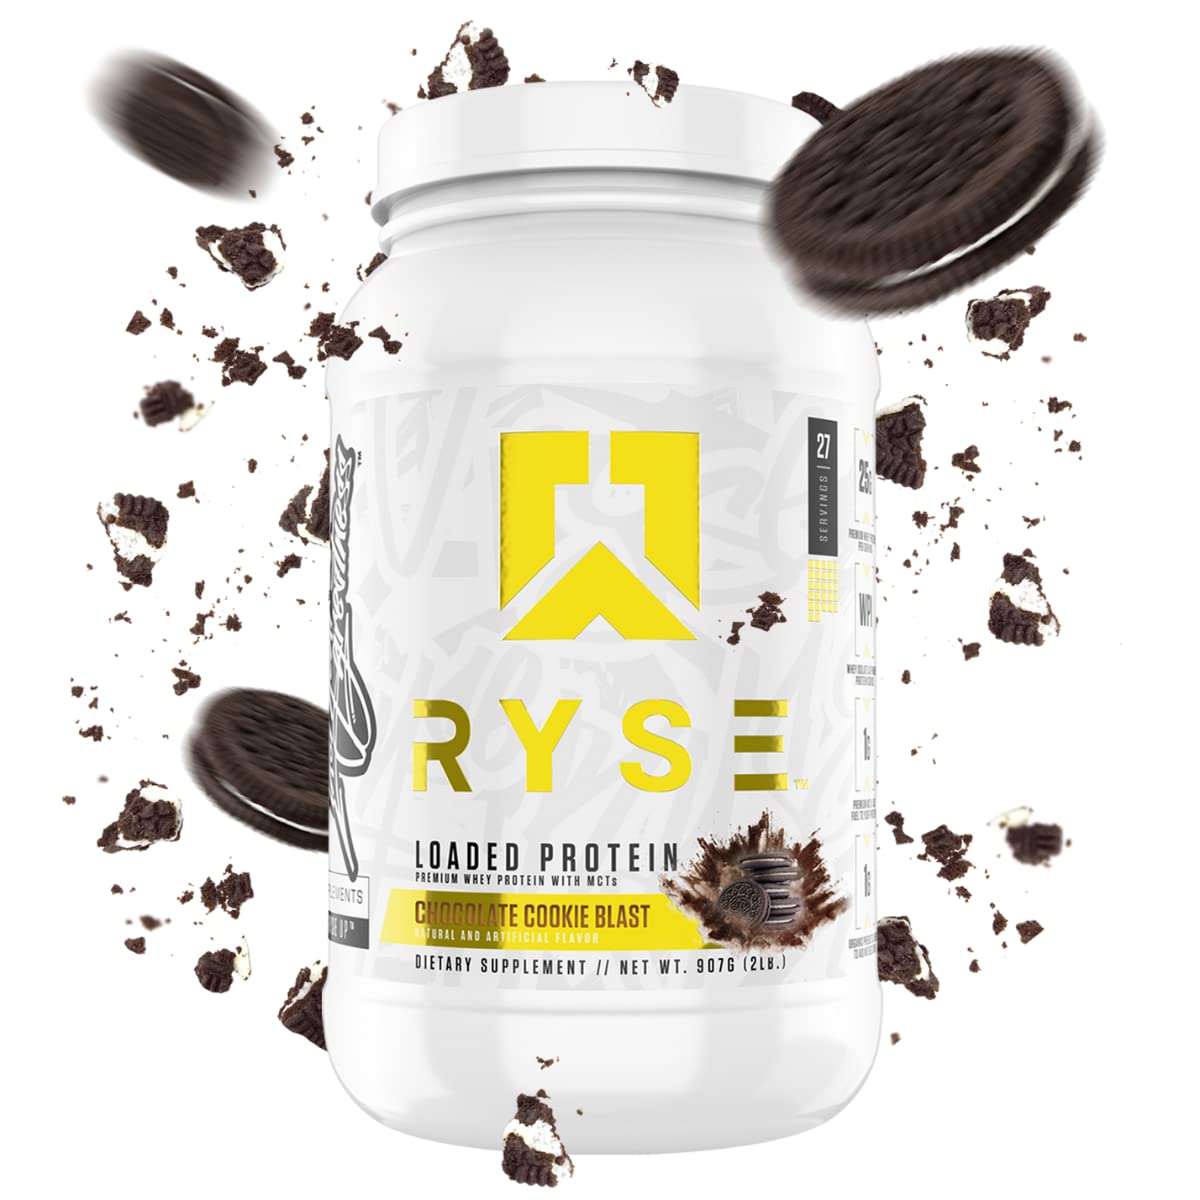 Ryse Loaded Protein Powder | 25g Whey Protein Isolate & Concentrate | with  Prebiotic Fiber & MCTs | Low Carbs & Low Sugar | 27 Servings (Peanut Butter